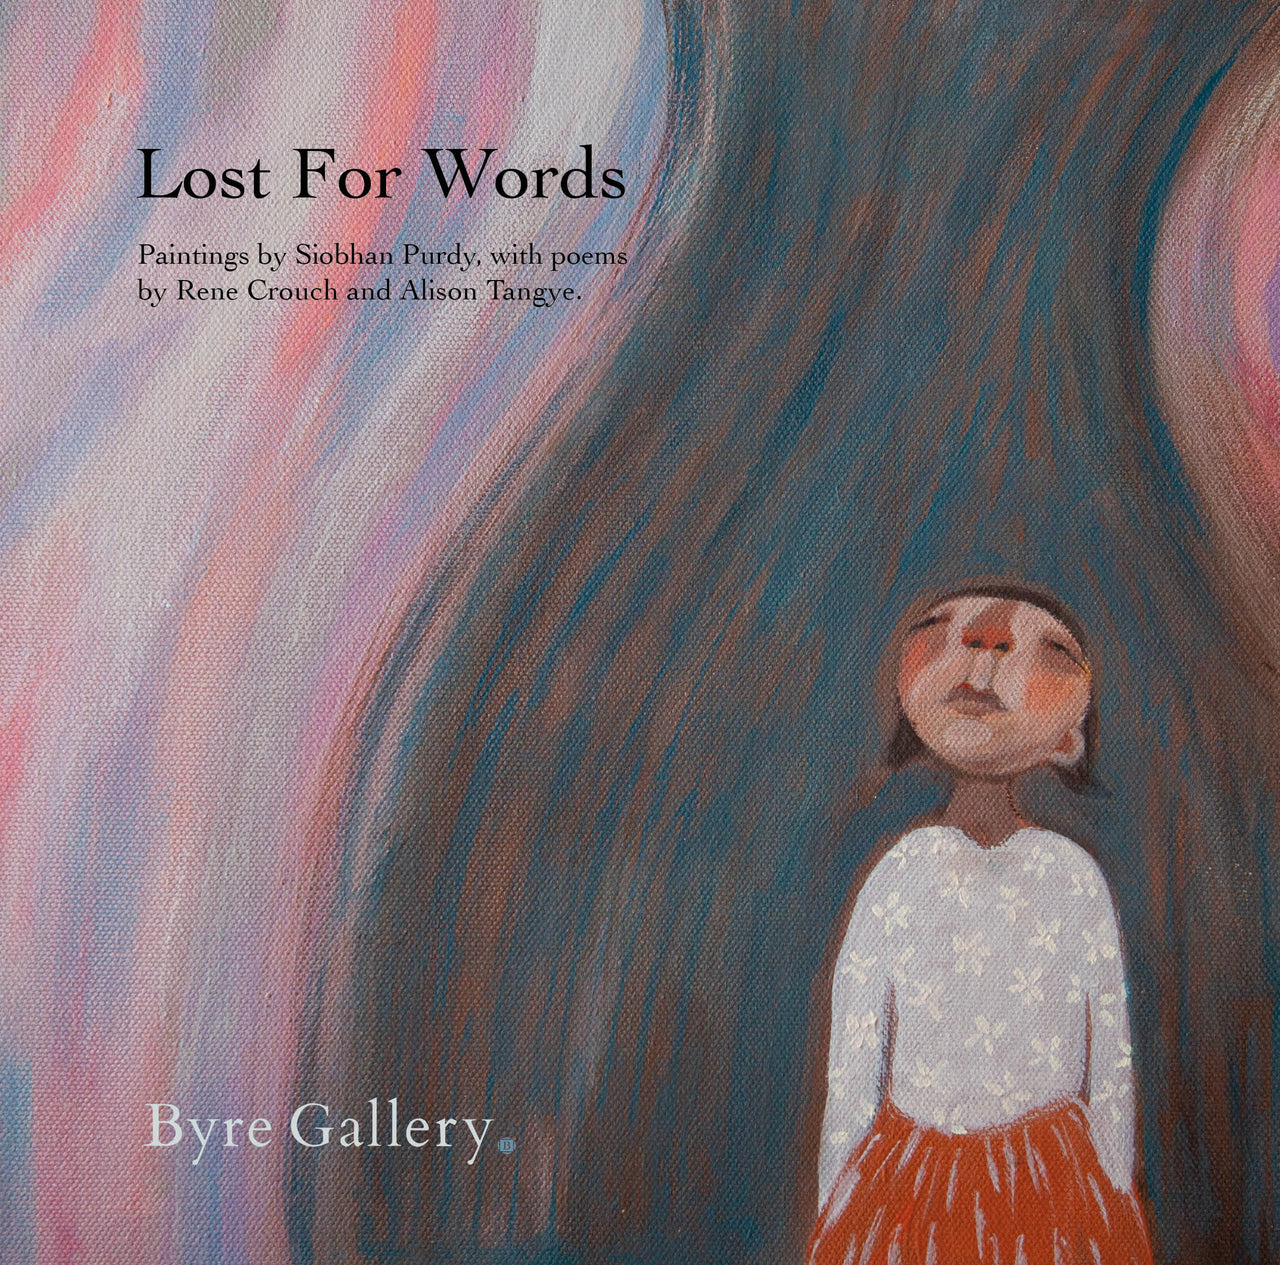 Book for cover of Lost for Words a book of poetry by Alison Tangye and Rene Crouch with paintings by Siobhan Purdy